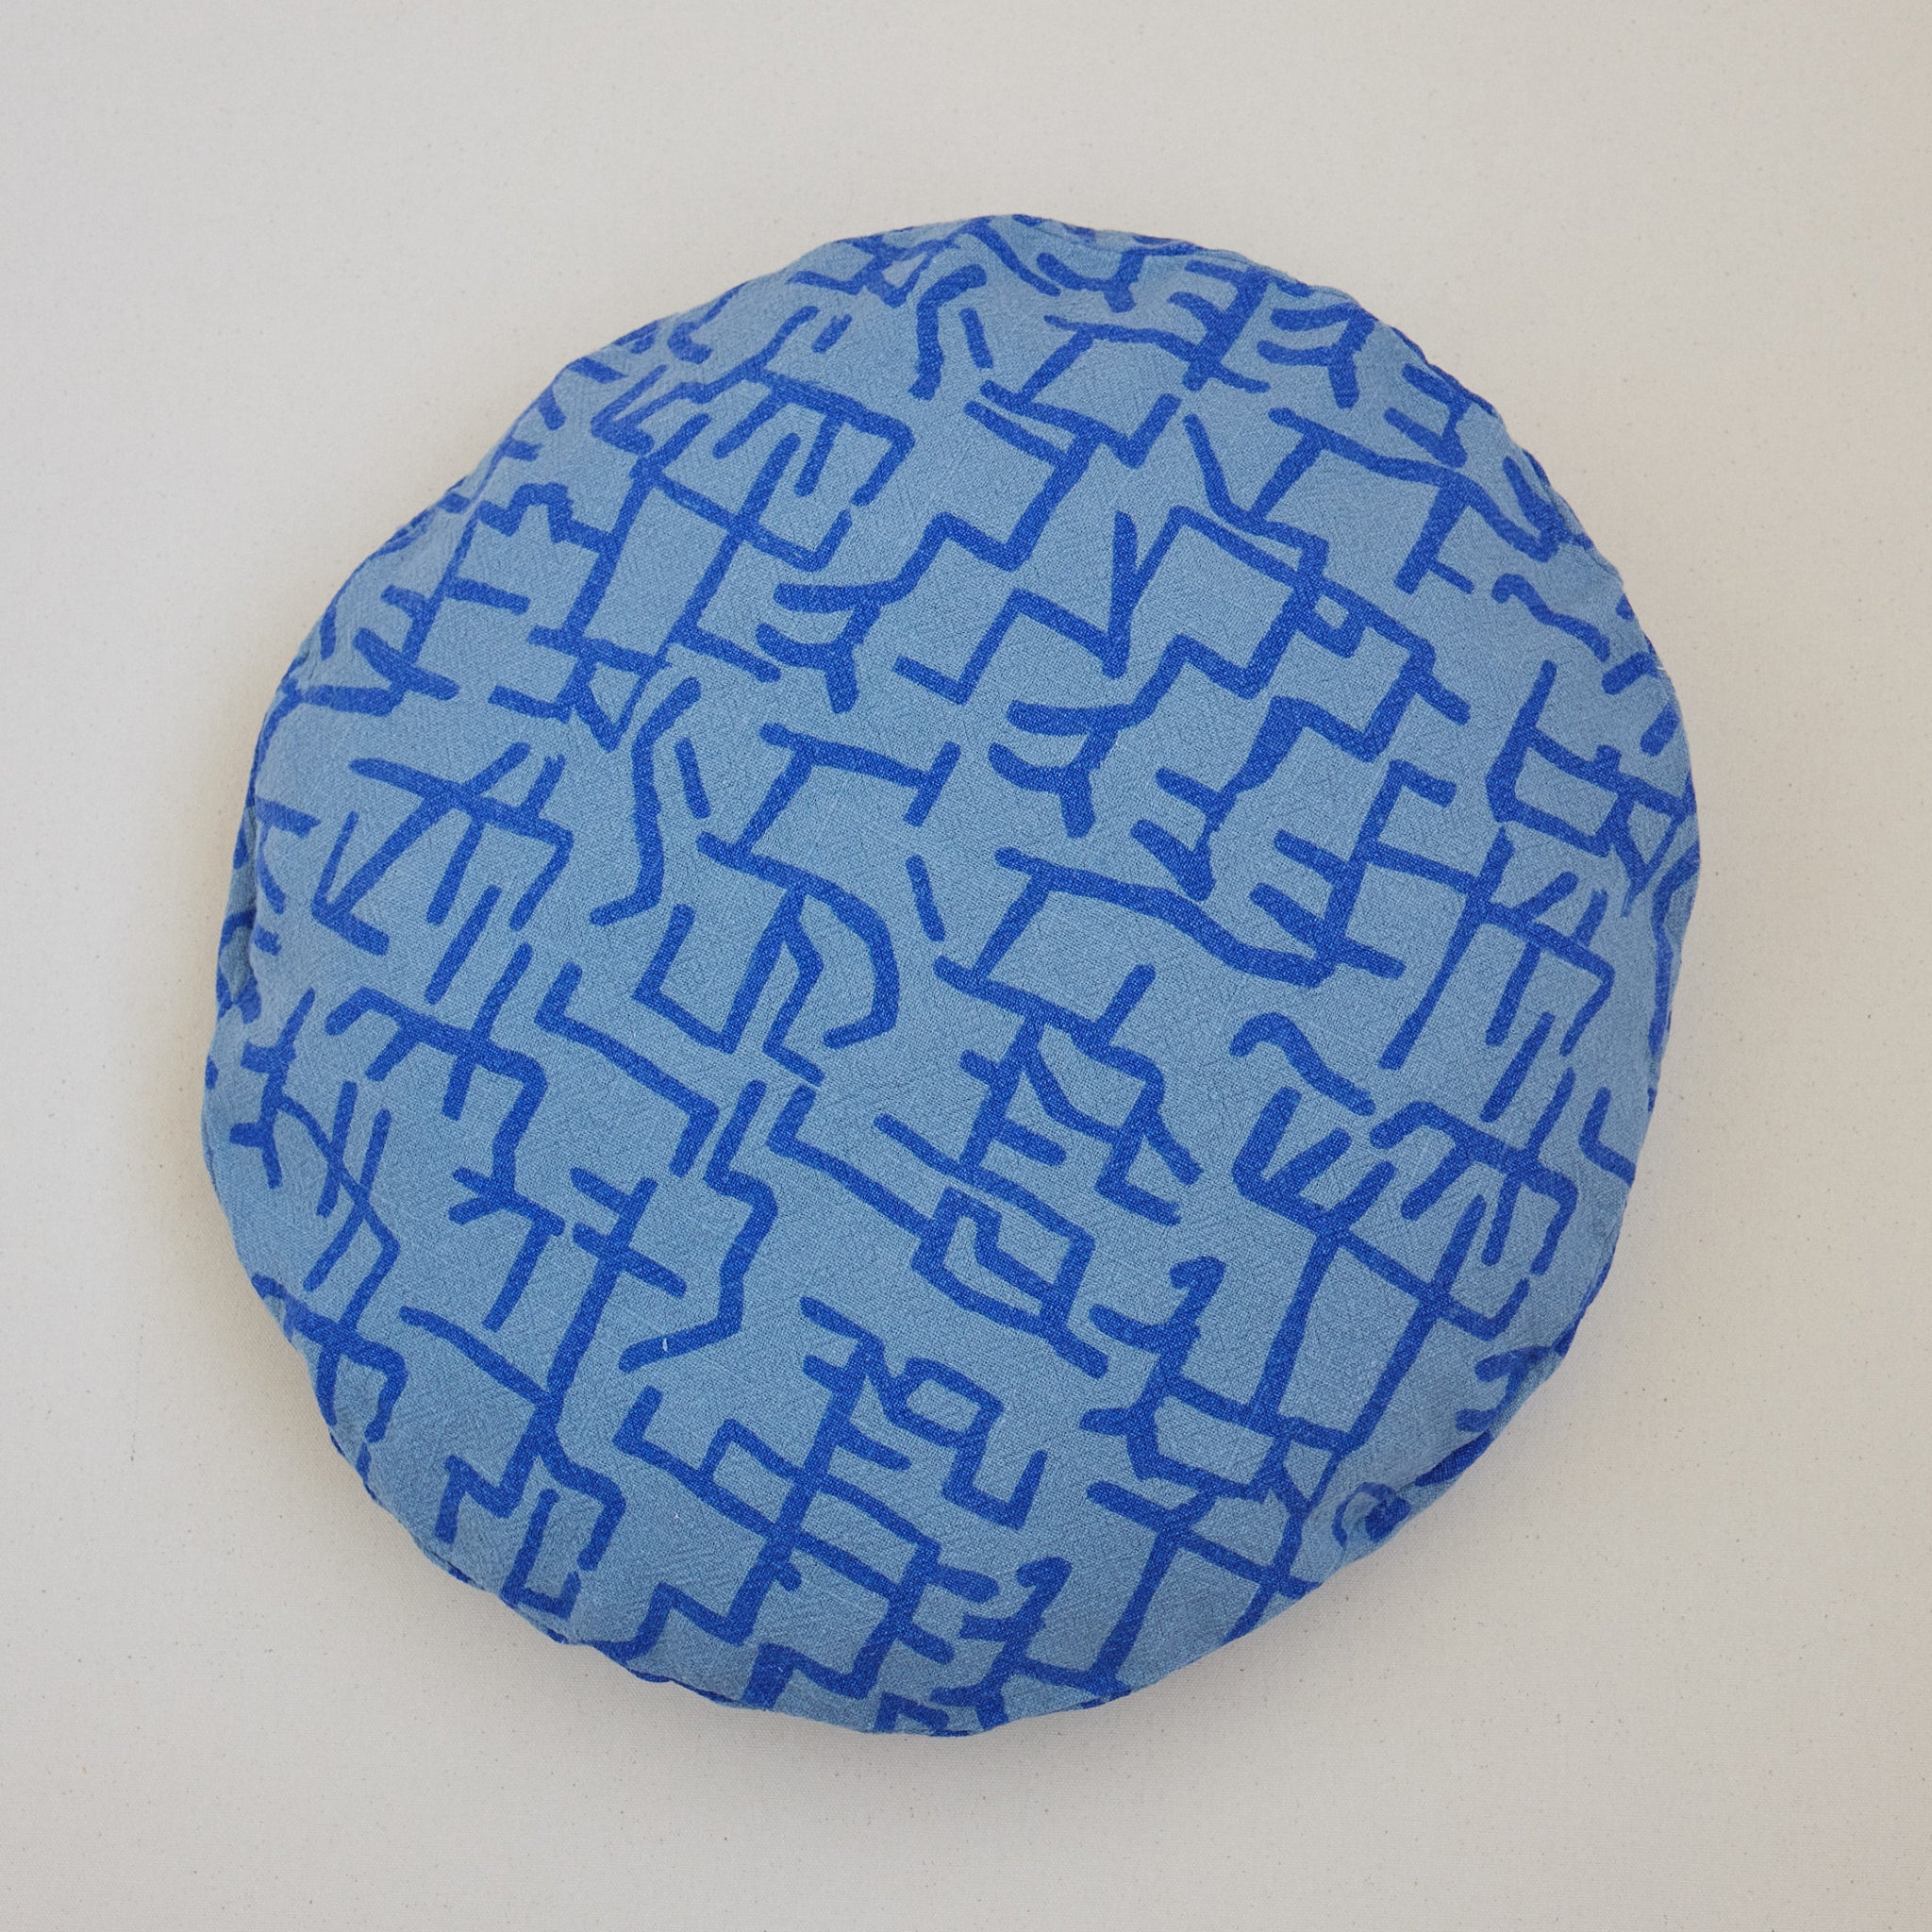 The Round Throw Pillow - Guston in Cobalt and Stone Blue